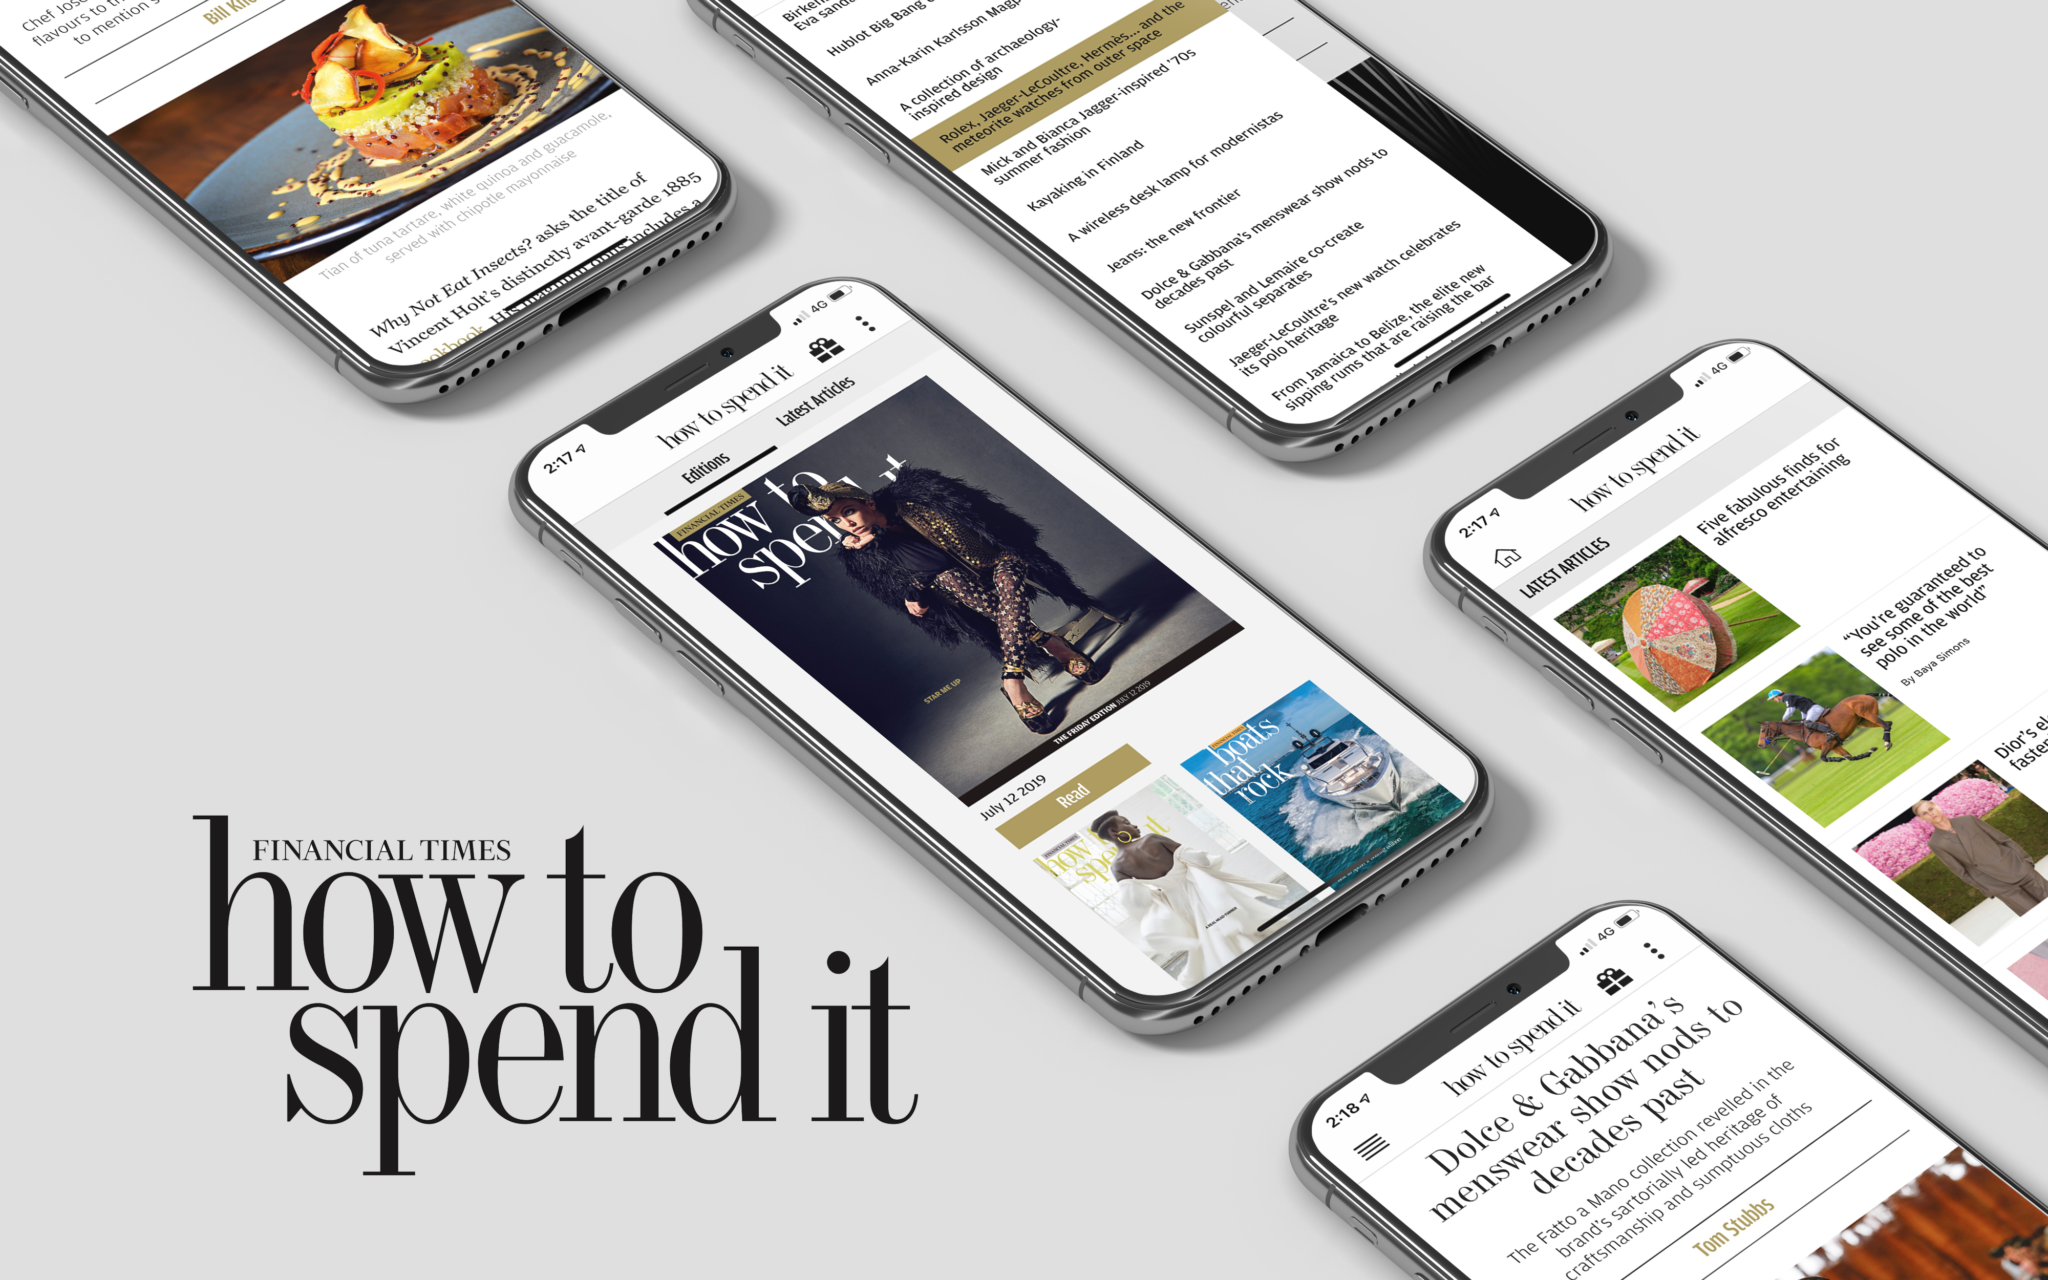 financial times how to spend it app